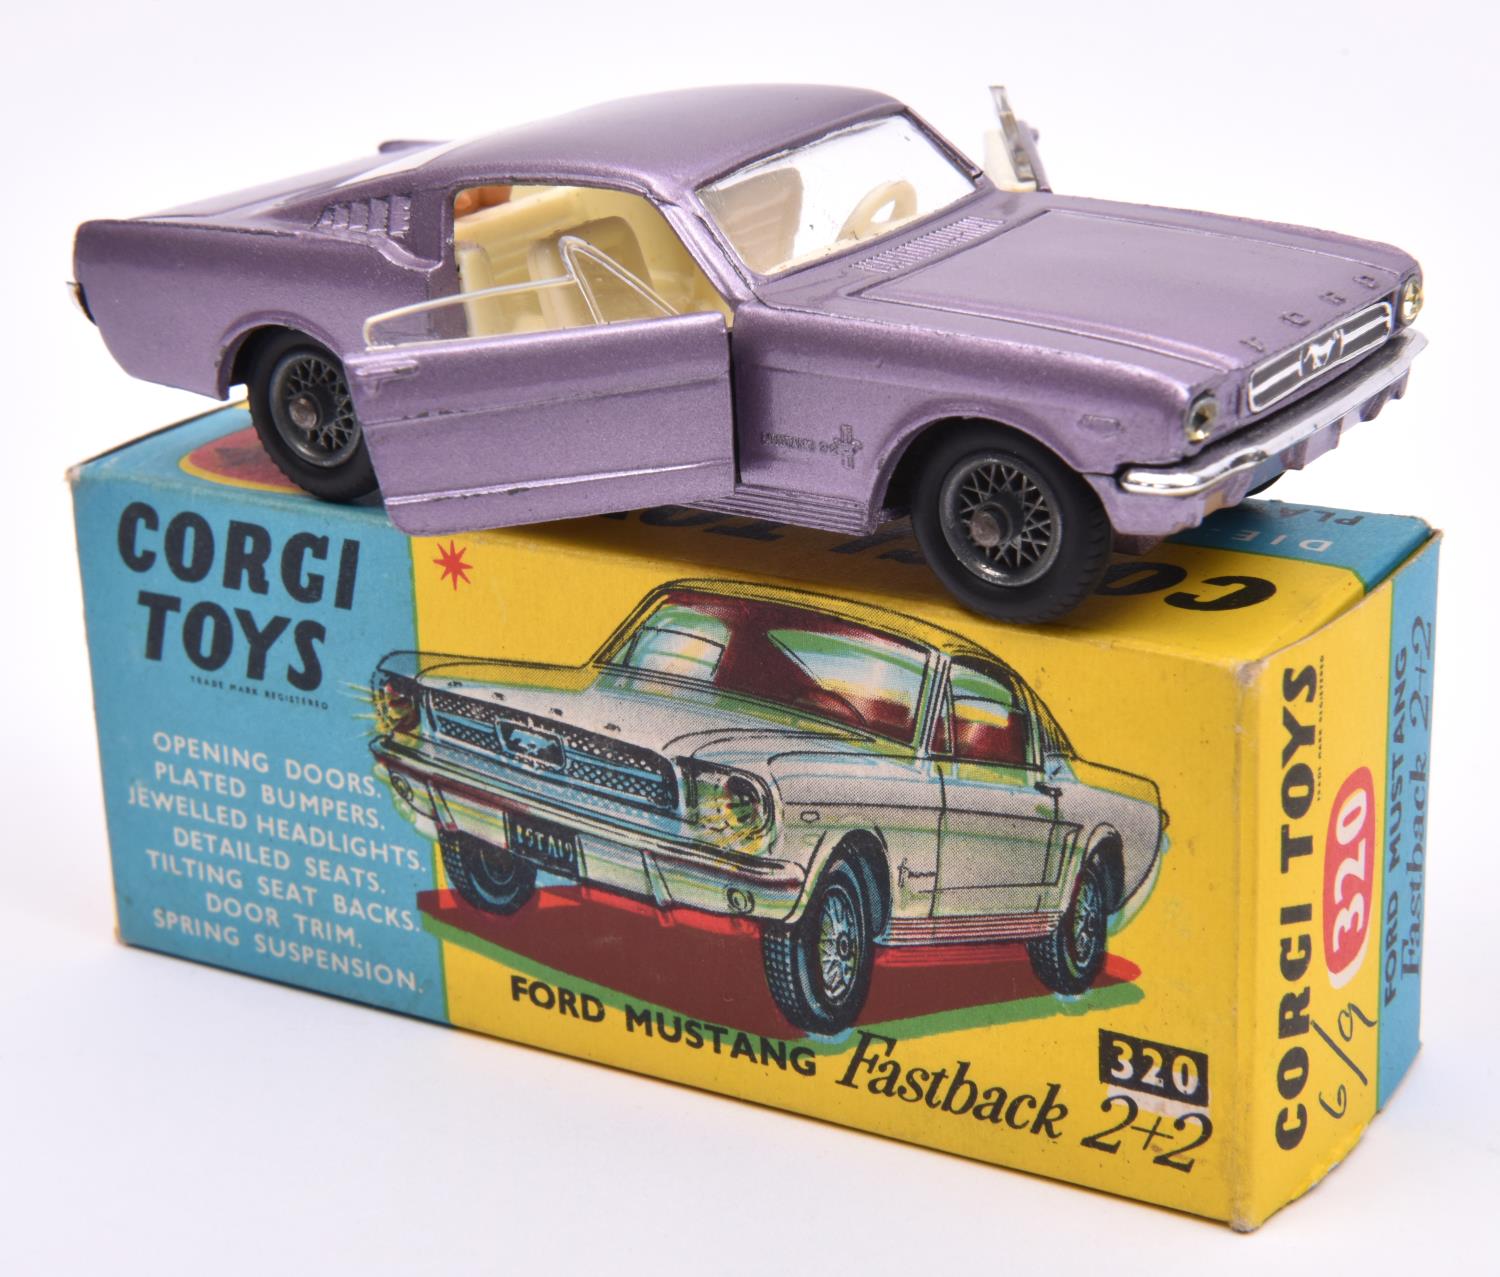 Corgi Toys Ford Mustang Fastback 2+2 (320). An example in metallic lilac with cream interior, fitted